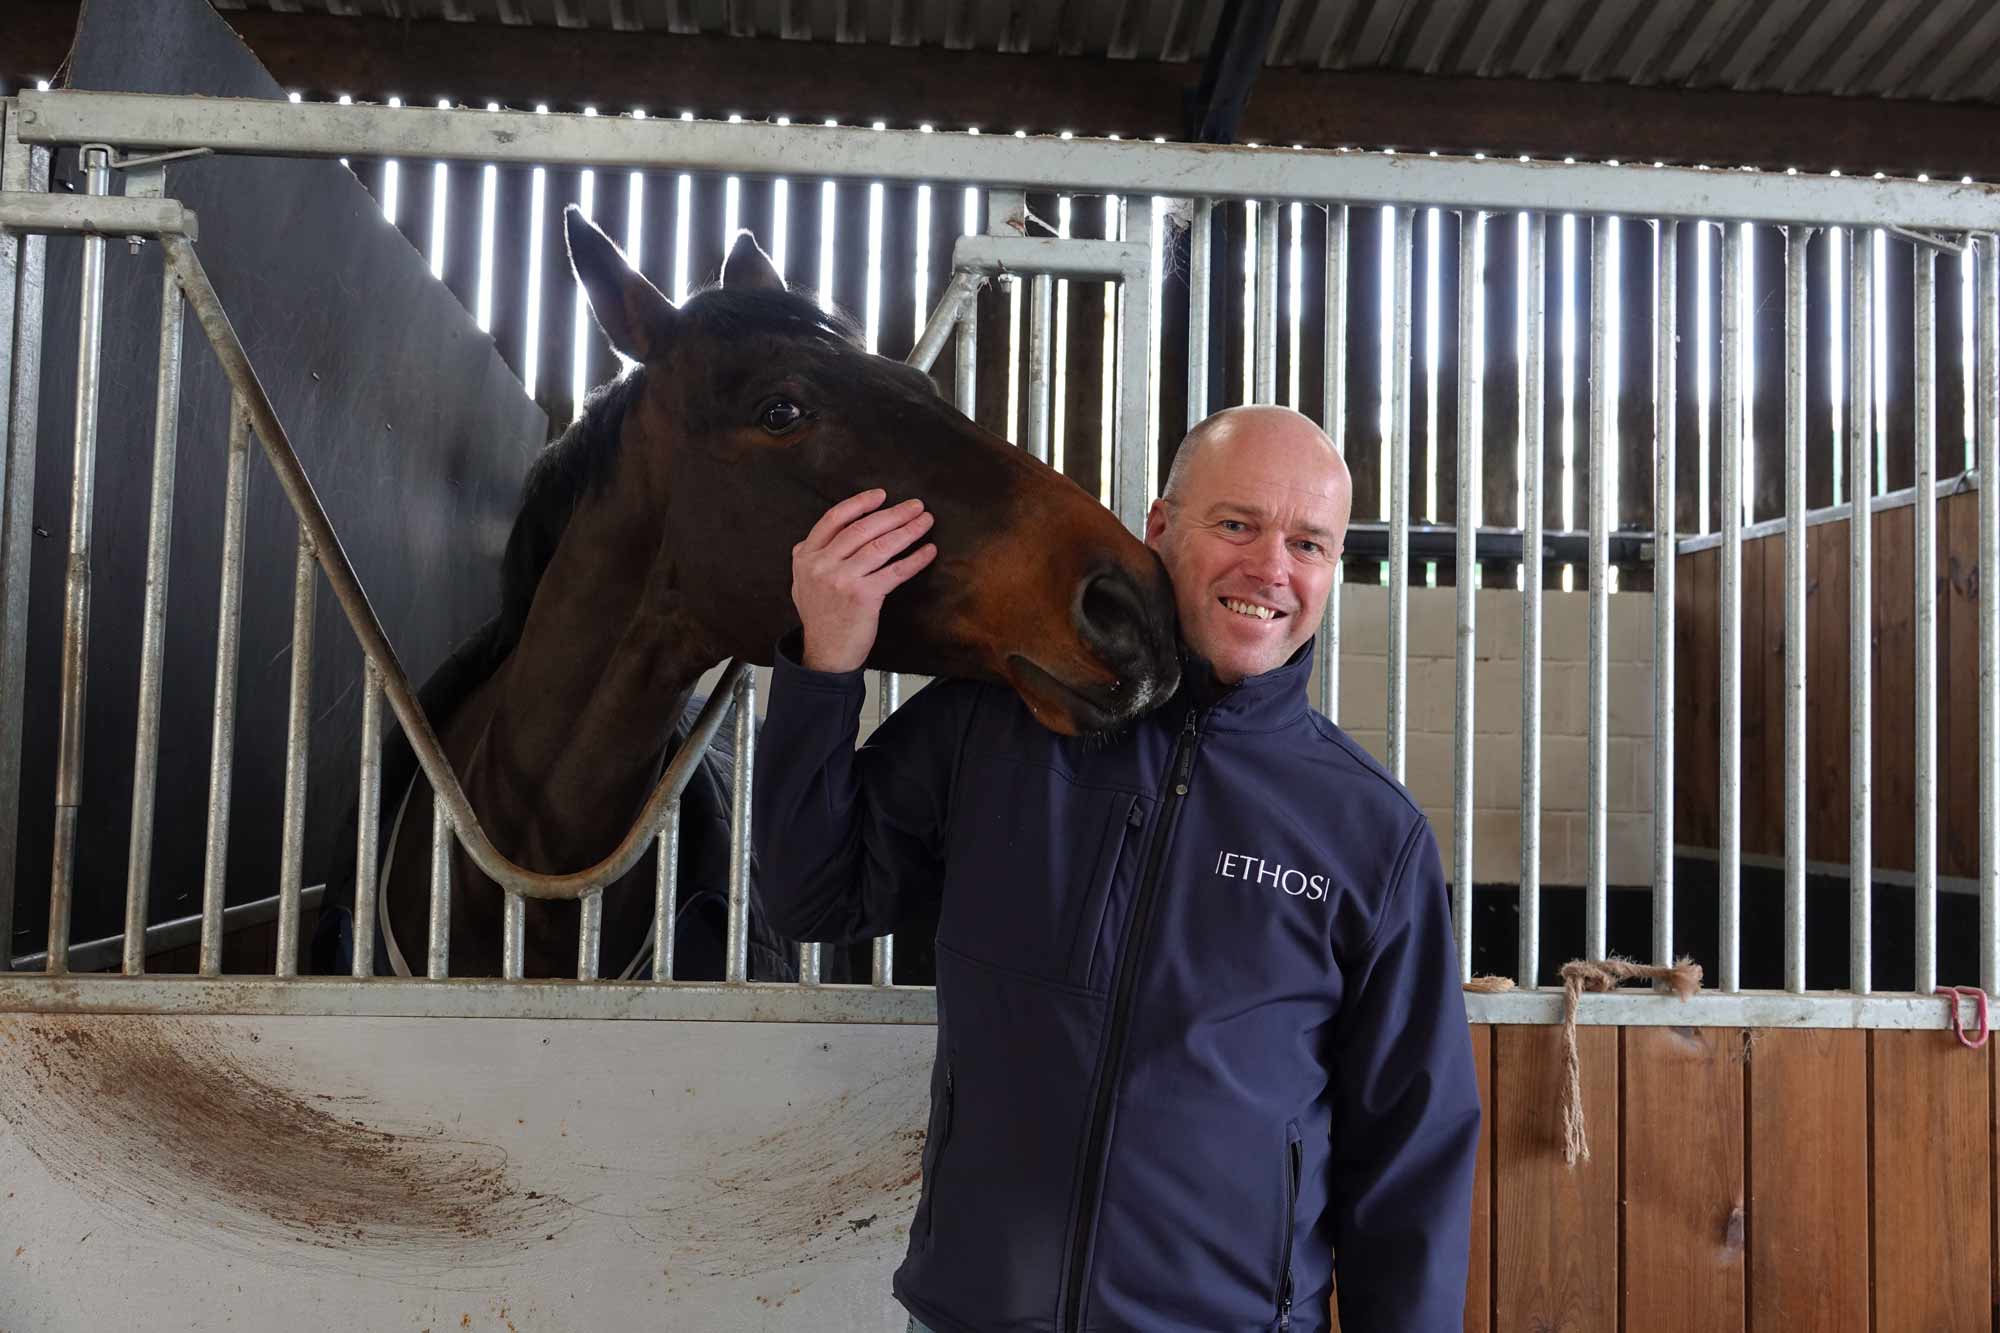 Chris Brown, Ethos Asset Finance’s MD, as his company prepares to support Point to Point racing in Yorkshire